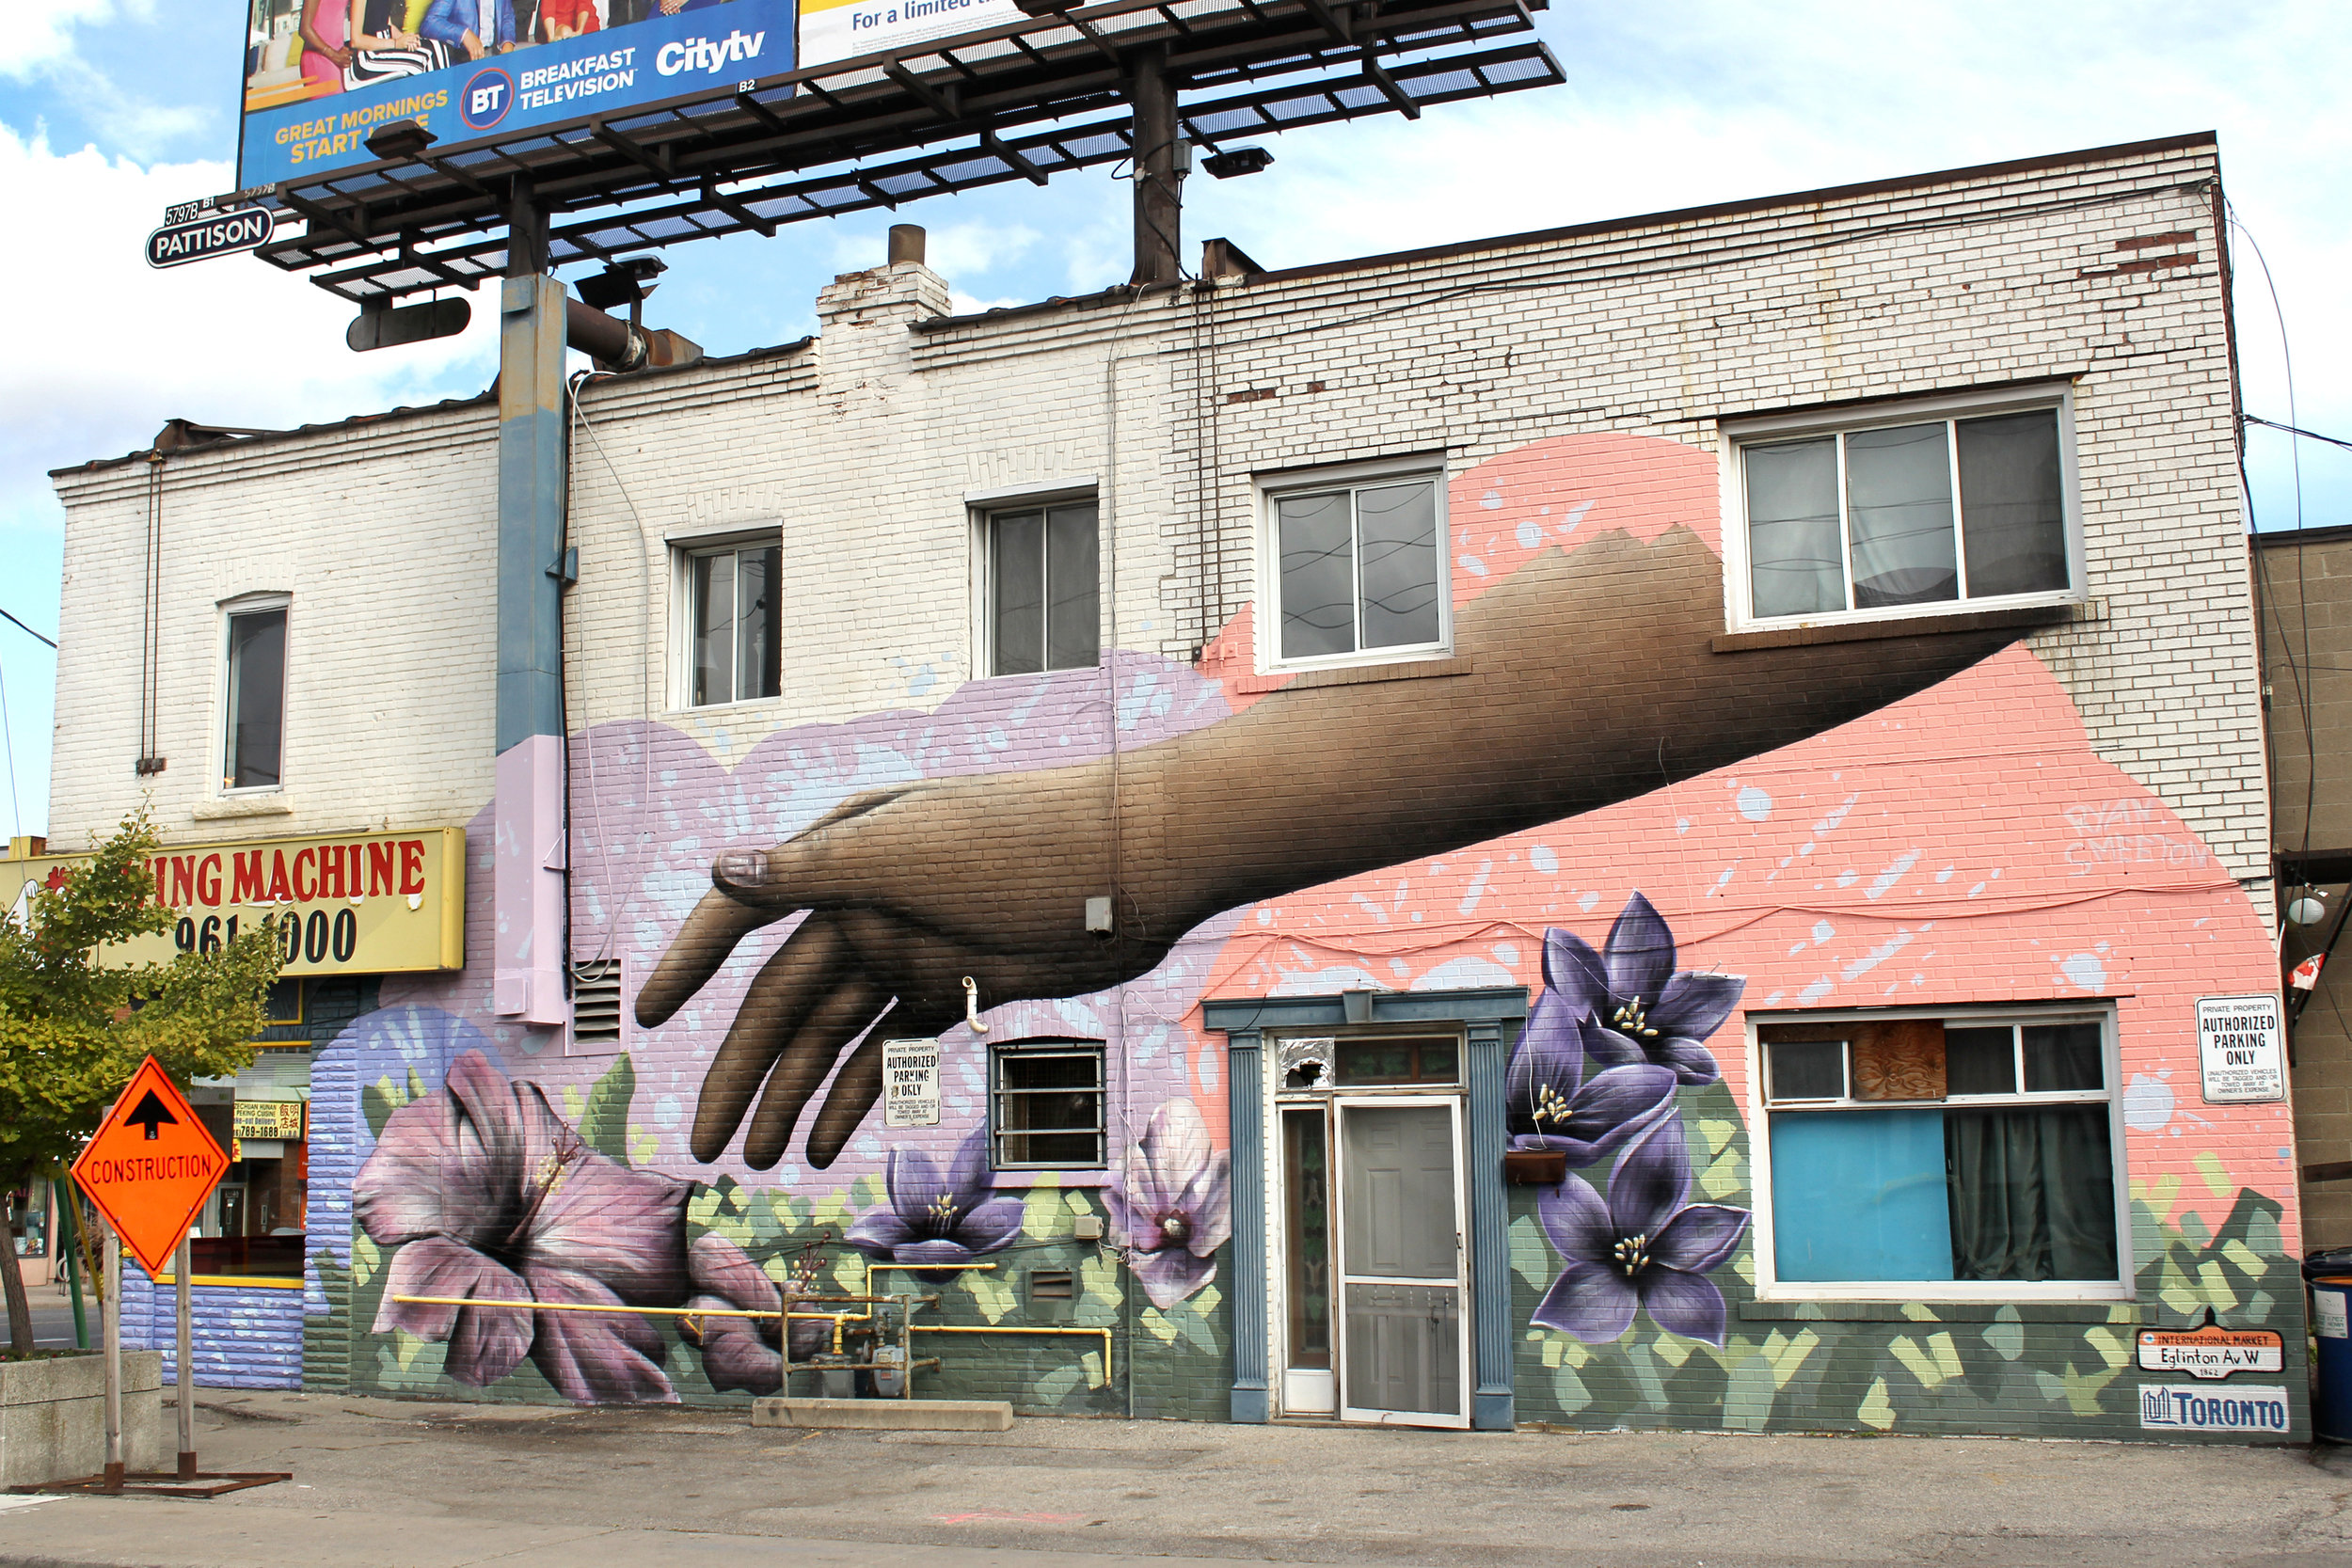 Together We Grow, Mural for the York Eglinton BIA